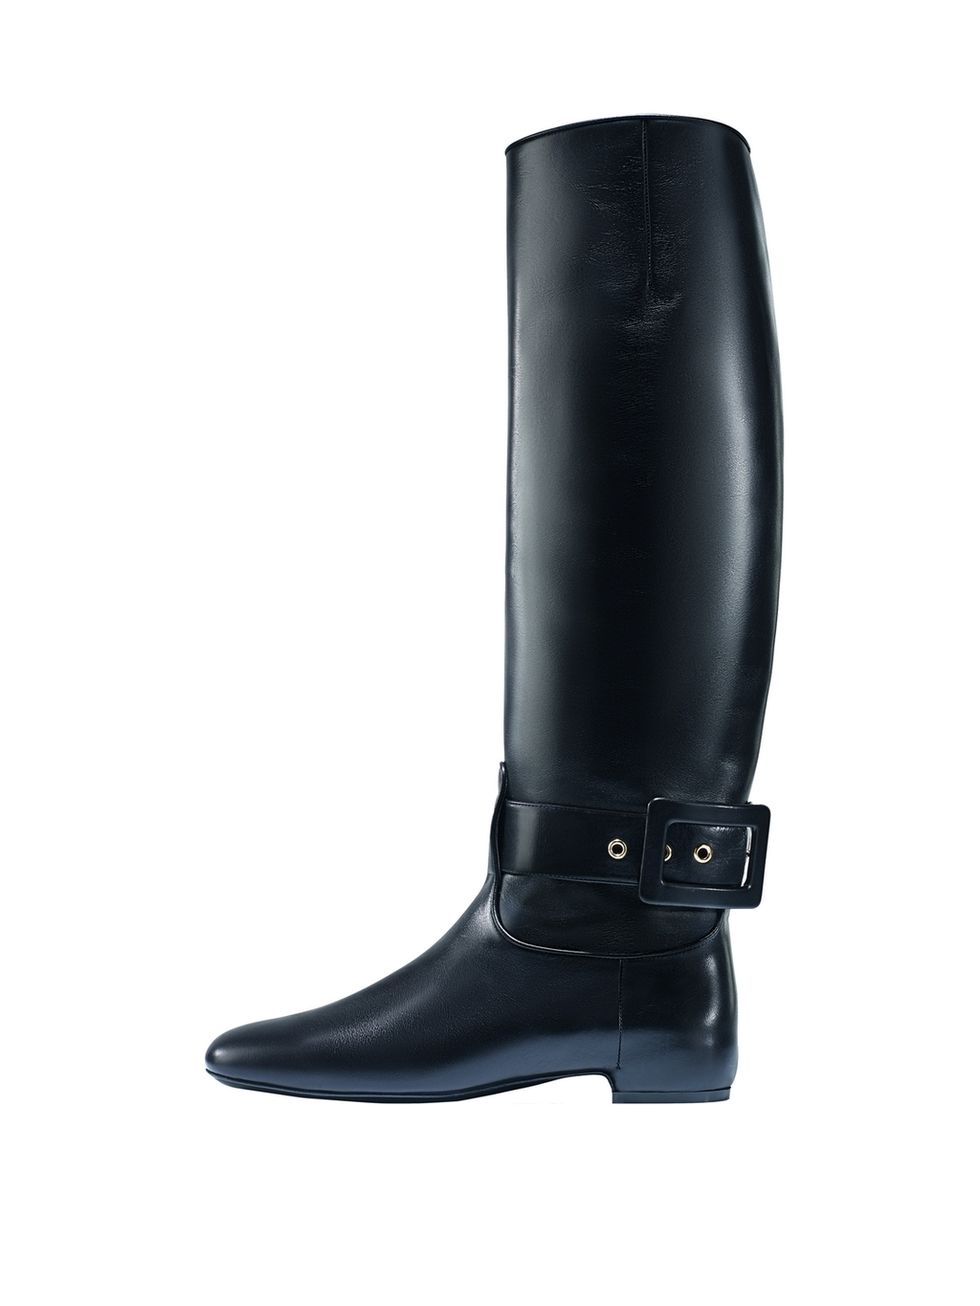 Boot, Riding boot, Costume accessory, Leather, Black, Knee-high boot, Cylinder, Still life photography, Motorcycle boot, Synthetic rubber, 